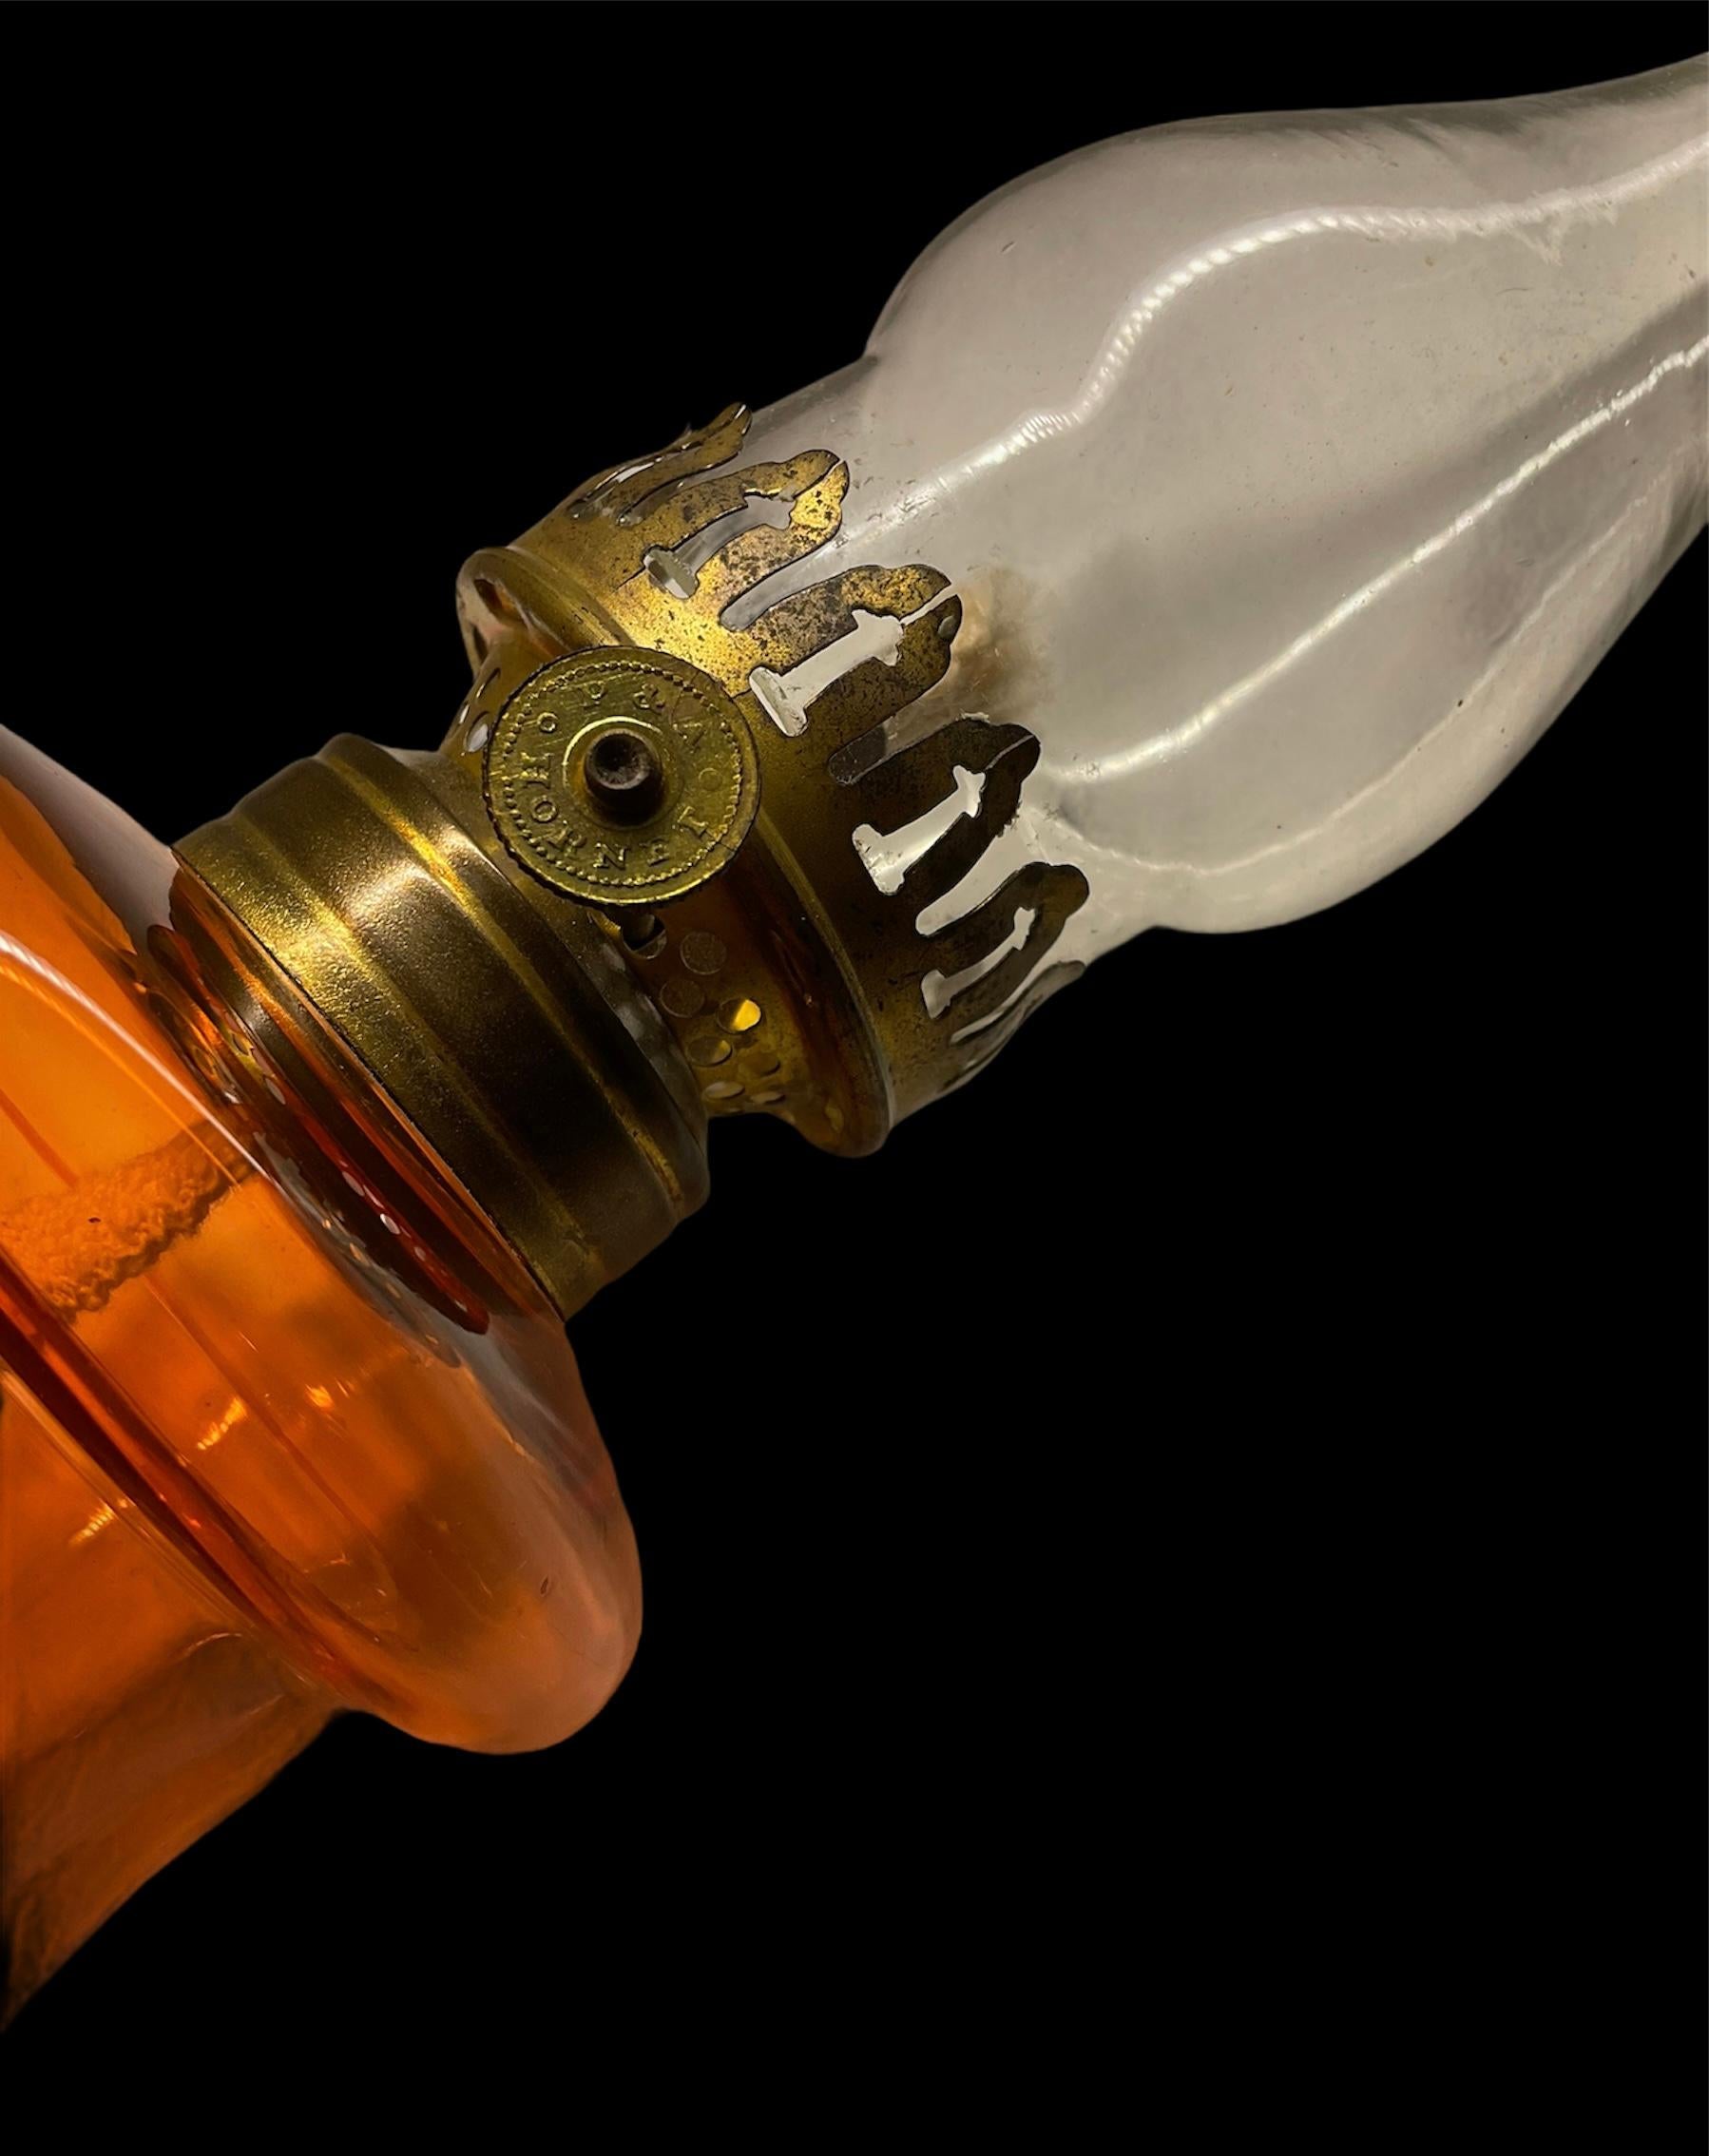 This a P&A Hornet small clear and orange glass kerosene oil hurricane lamp. It has a wick raising knob (the name of the company is inscribed on it) in one of the lateral aspect of the center of the lamp.